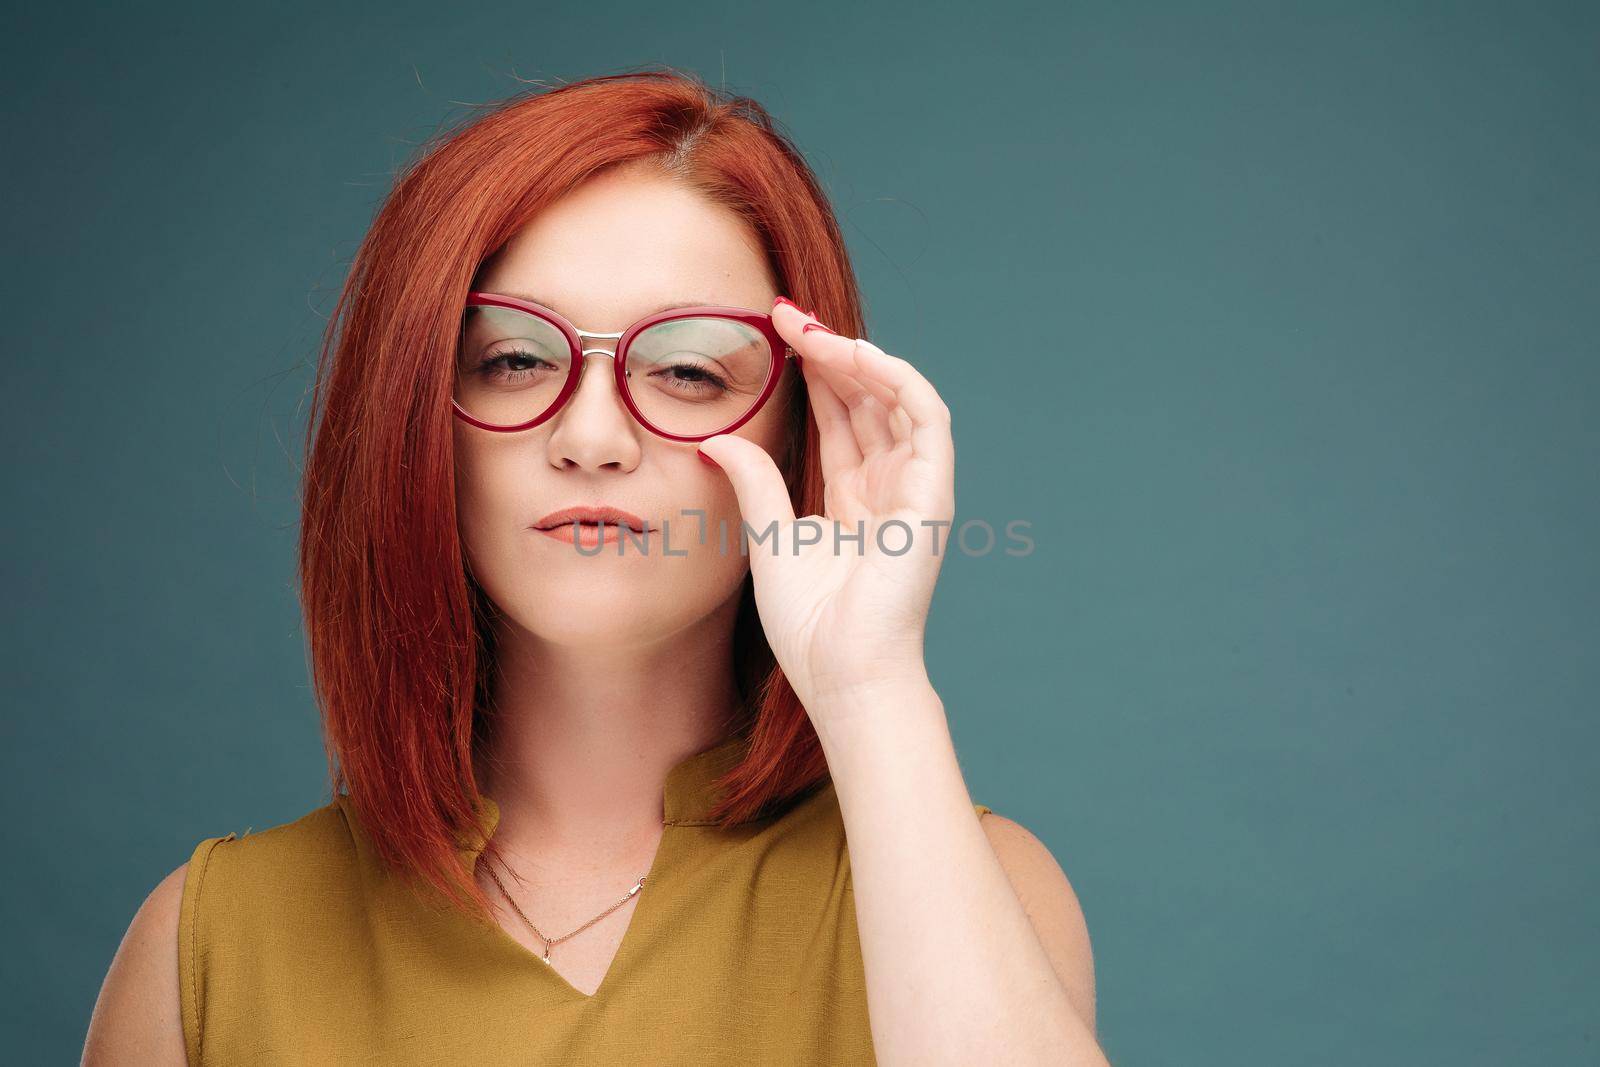 Fashion studio portrait of pretty young hipster red hair woman with bright sexy make up and glasses , wearing stylish urban t shirt, Blue wall background.